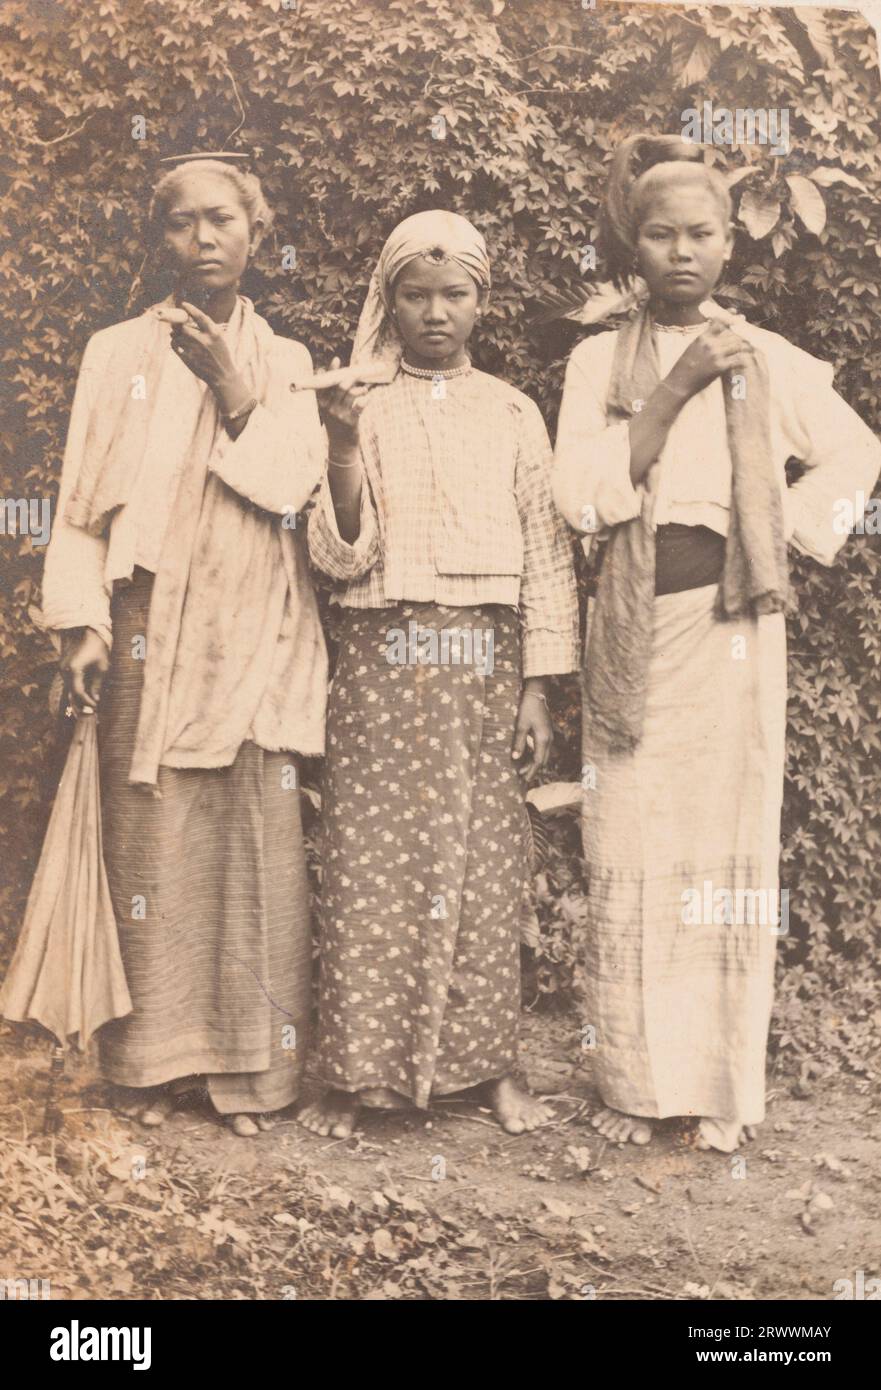 Portrait of three Burmese woman in traditional dress including a silk longyi (wrapped cloth skirt) holding pipes. They stand barefoot outside, in front of foliage. Stock Photo